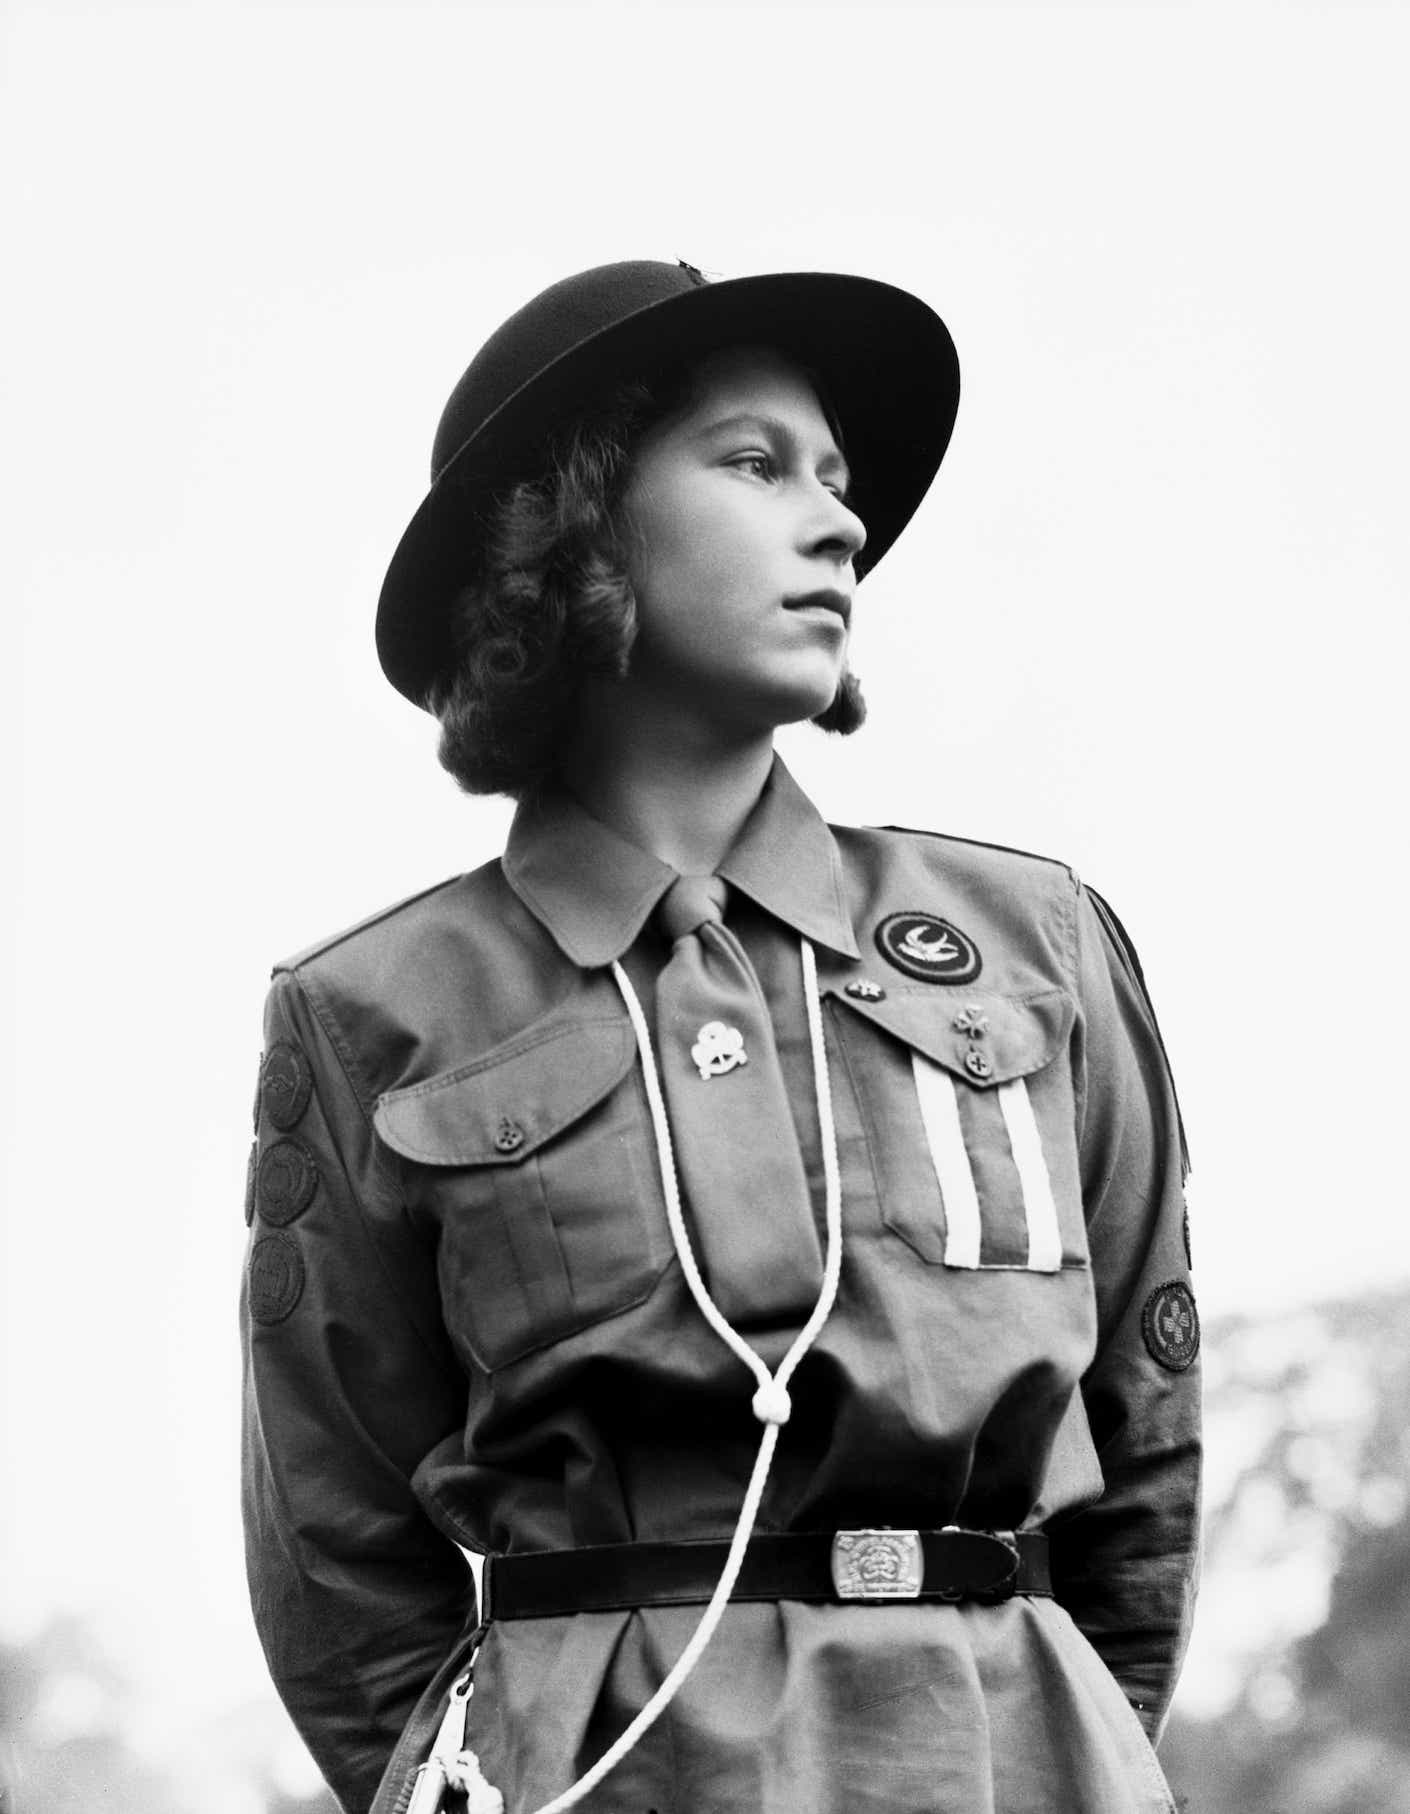 Princess Elizabeth in a Girl Guides uniform standing stoically.